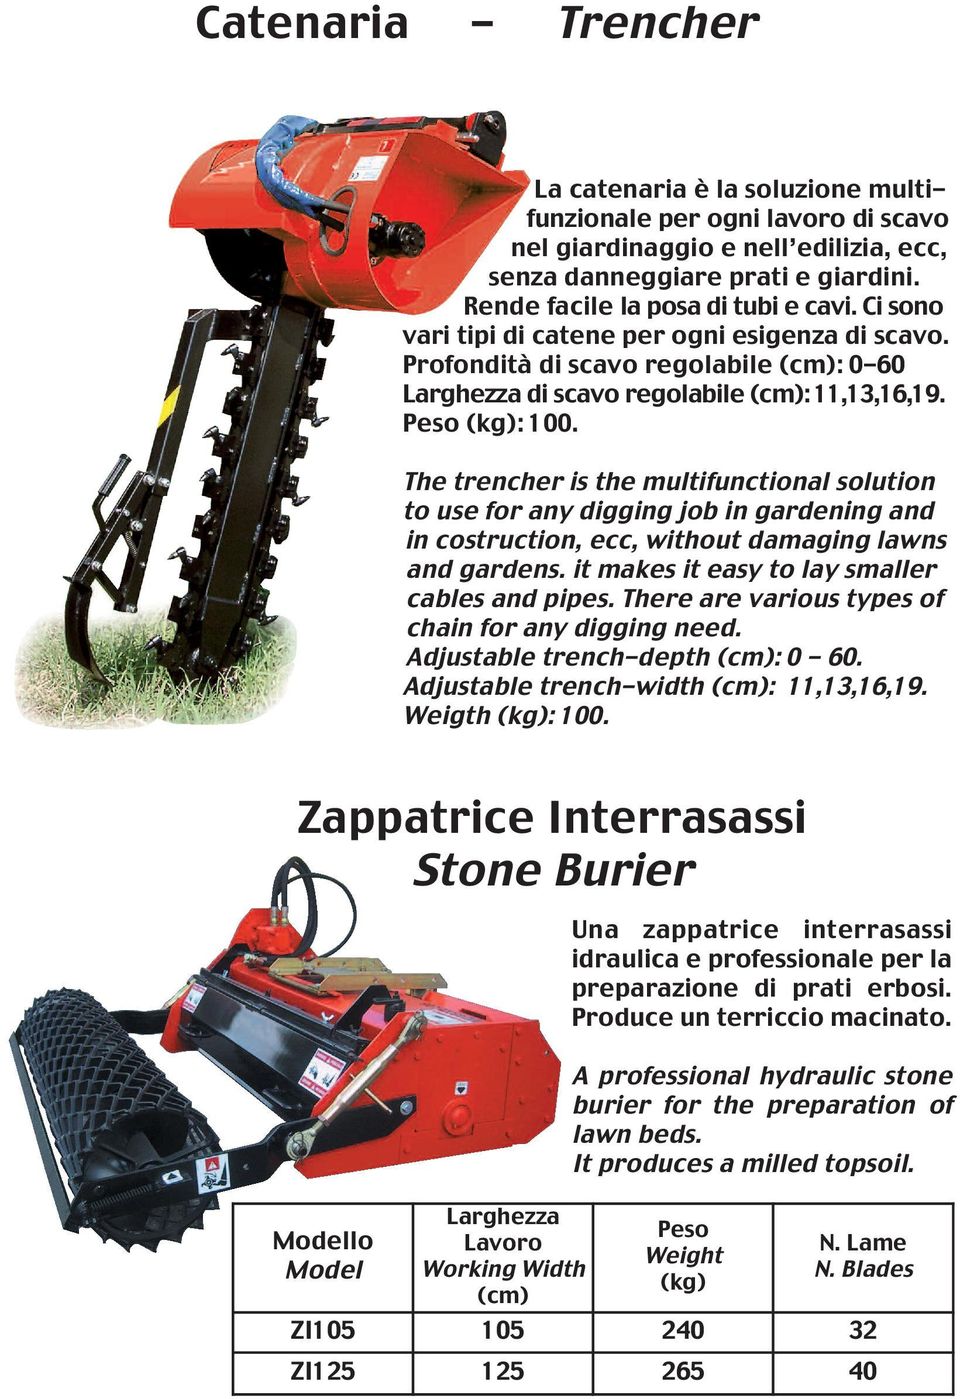 The trencher is the multifunctional solution to use for any digging job in gardening and in costruction, ecc, without damaging lawns and gardens. it makes it easy to lay smaller cables and pipes.